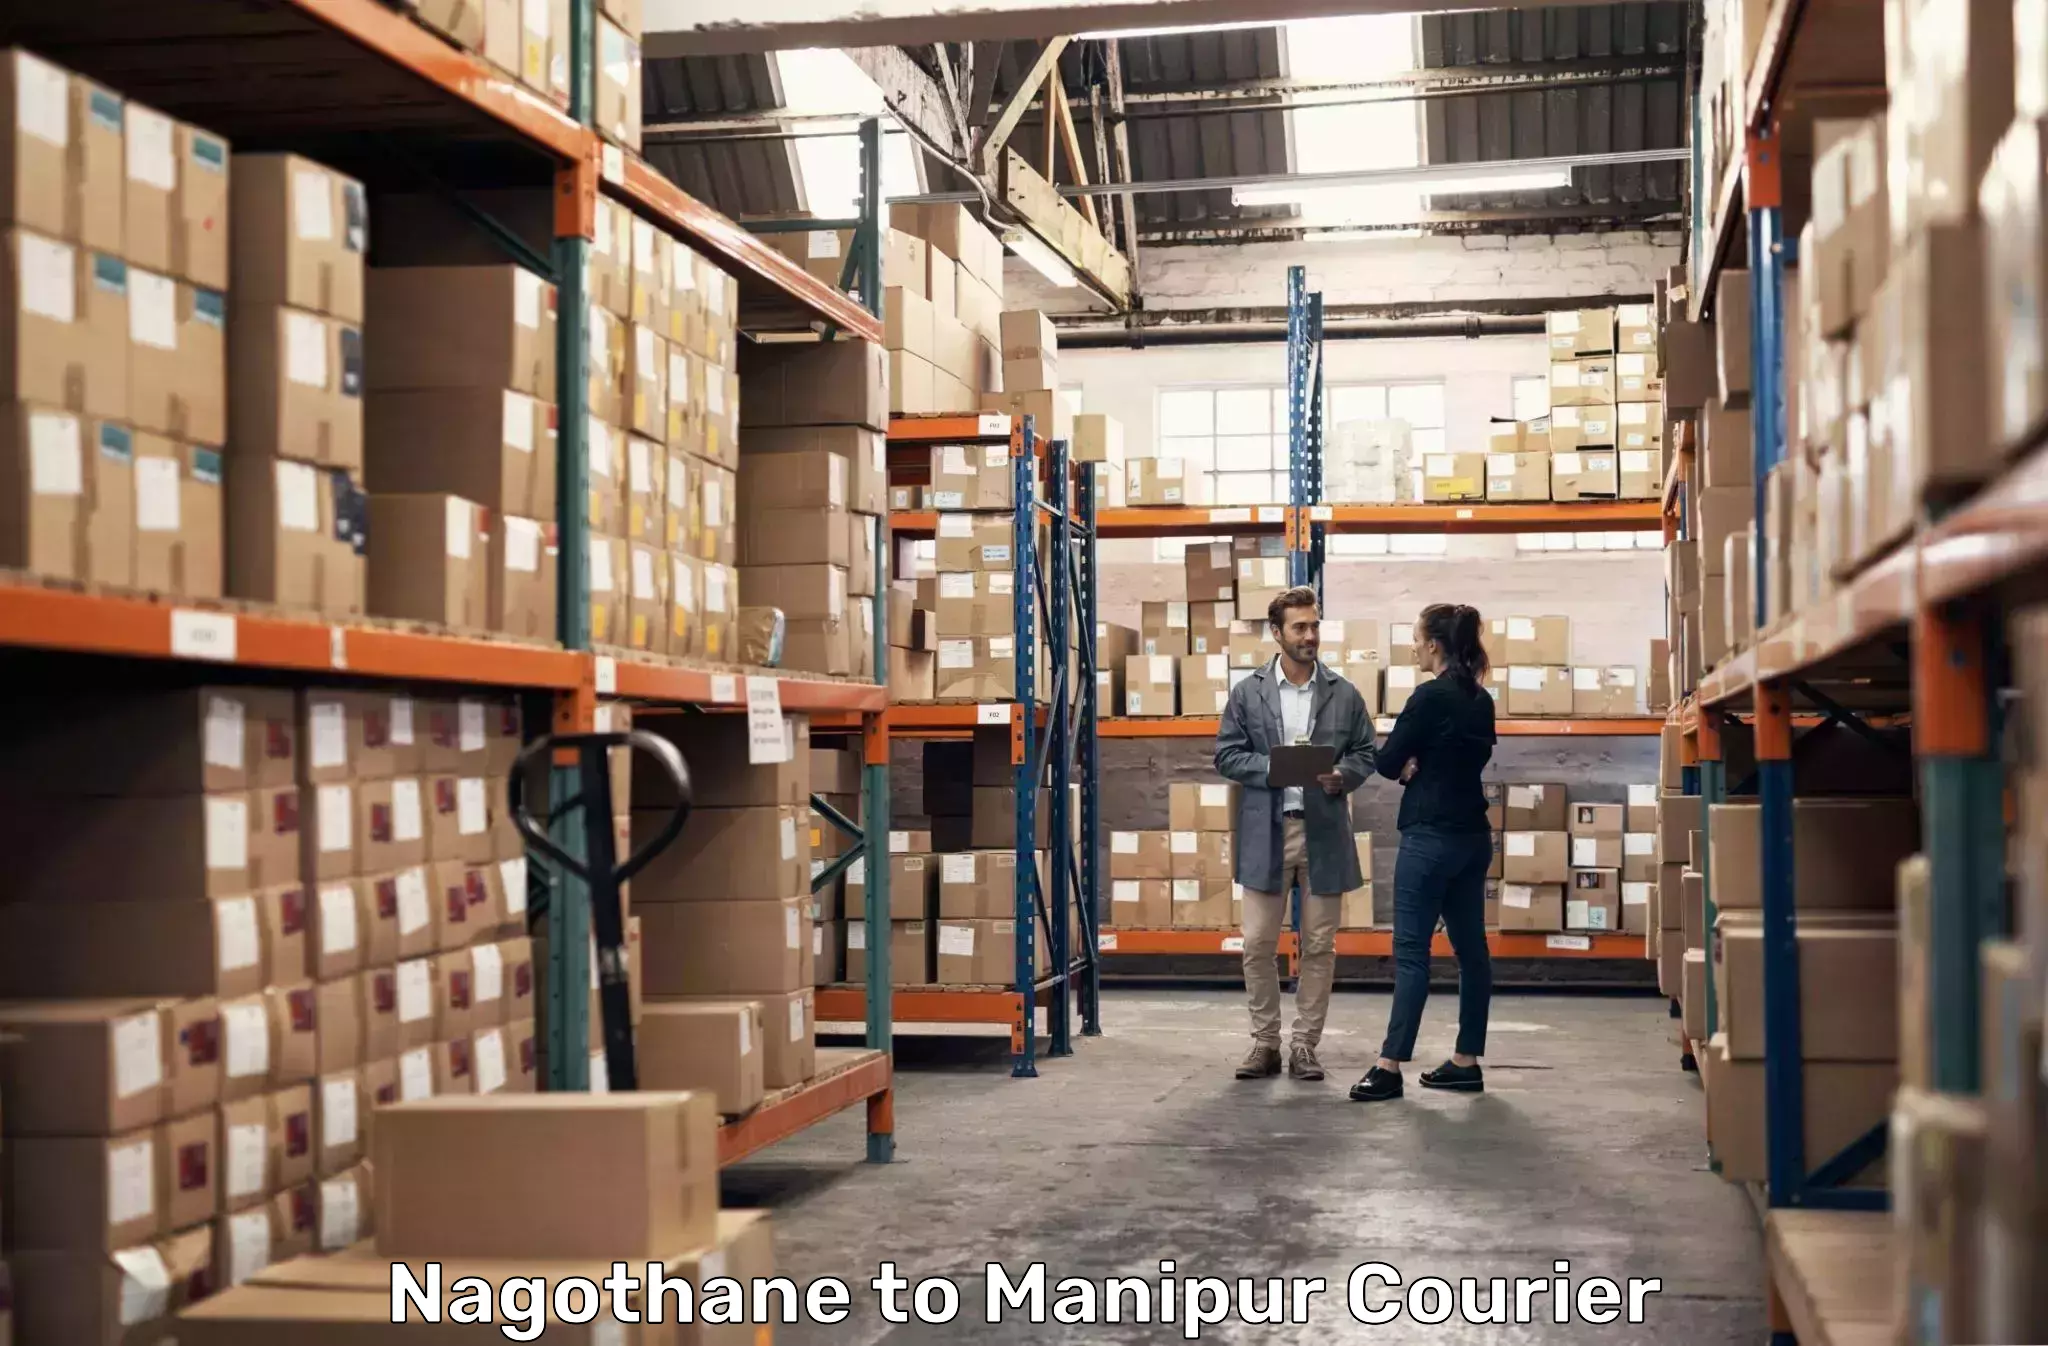 Courier service partnerships Nagothane to Manipur